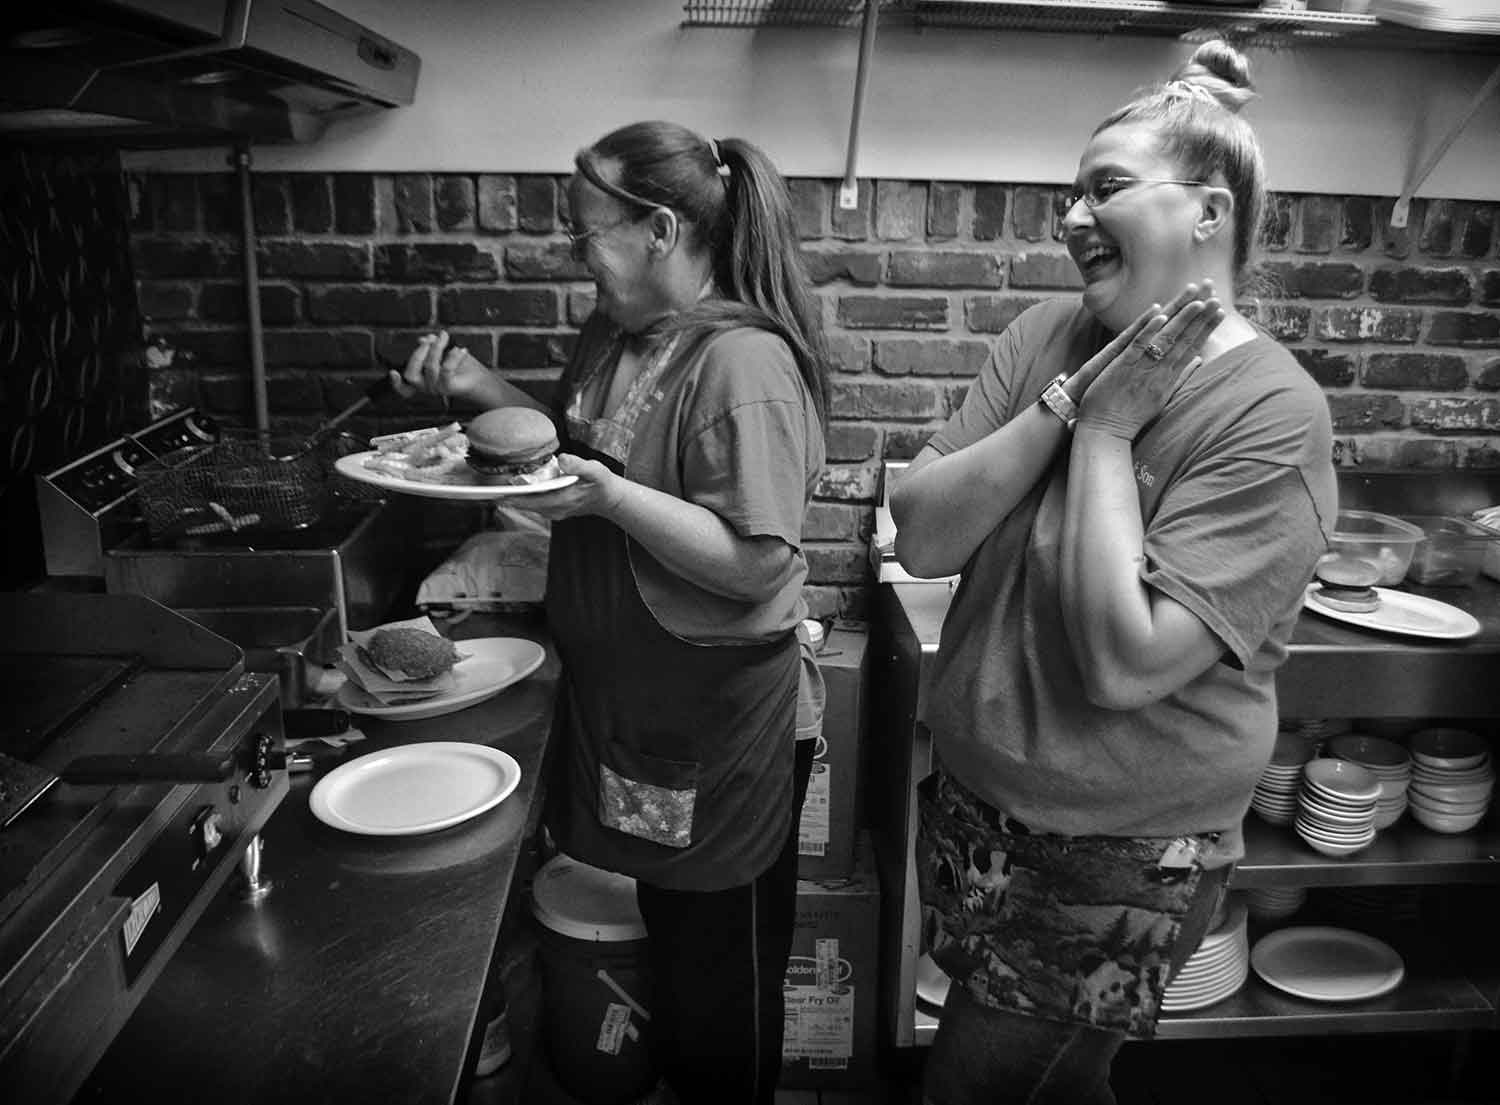 Diane Collins and Chris Goins share a laugh while preparing food at Katie’s Carry Out & Catering. photo by Alexandra Harper - 2014